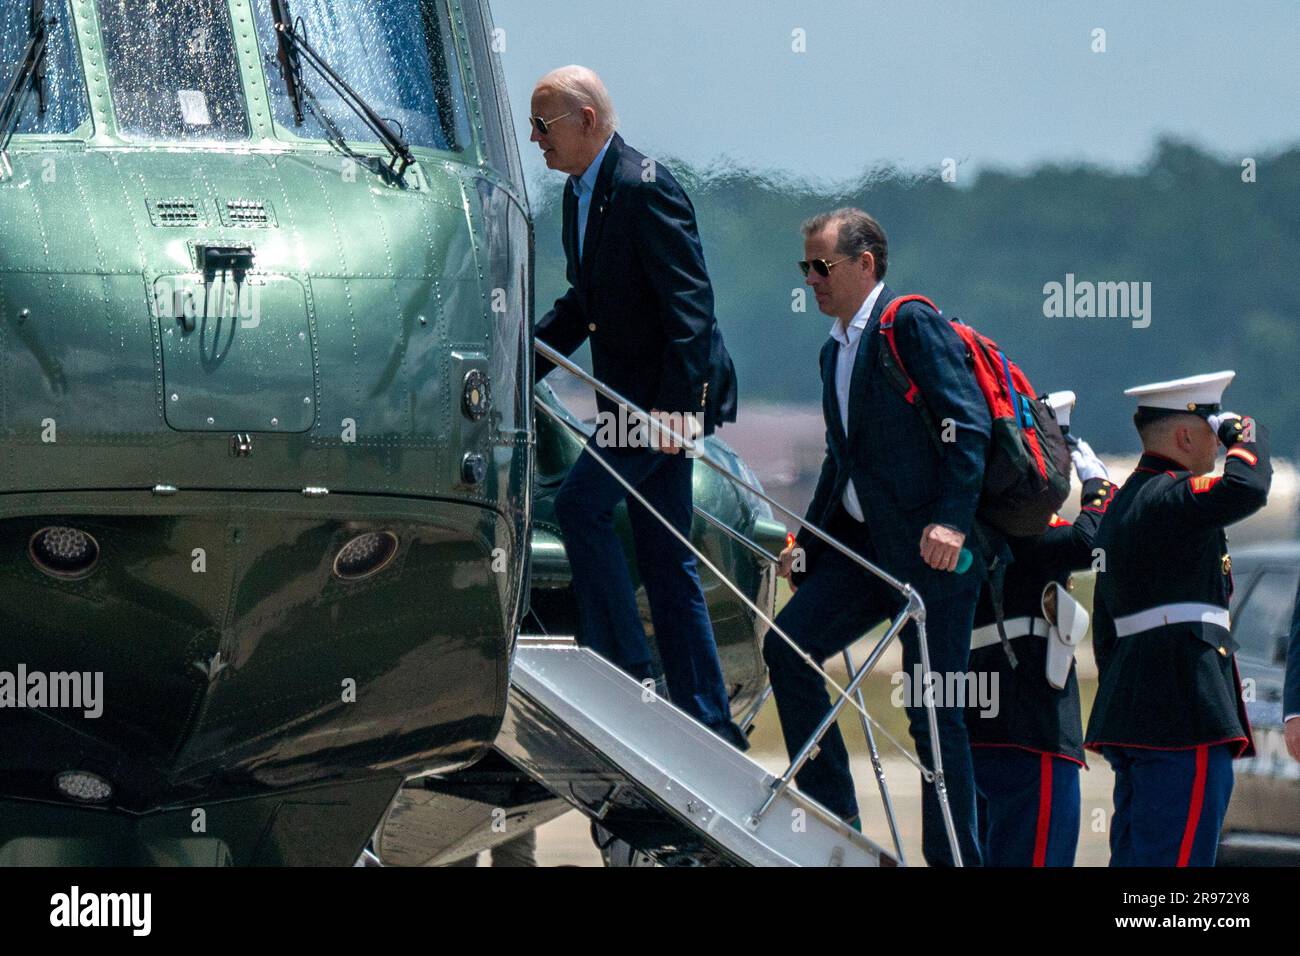 US President Joe Biden boards Marine One with his son Hunter Biden at Joint Base Andrews, Maryland, USA, 24 June 2023. President Biden was briefed and will continue to follow the unfolding situation in Russia.Credit: Shawn Thew/Pool via CNP/MediaPunch Credit: MediaPunch Inc/Alamy Live News Stock Photo